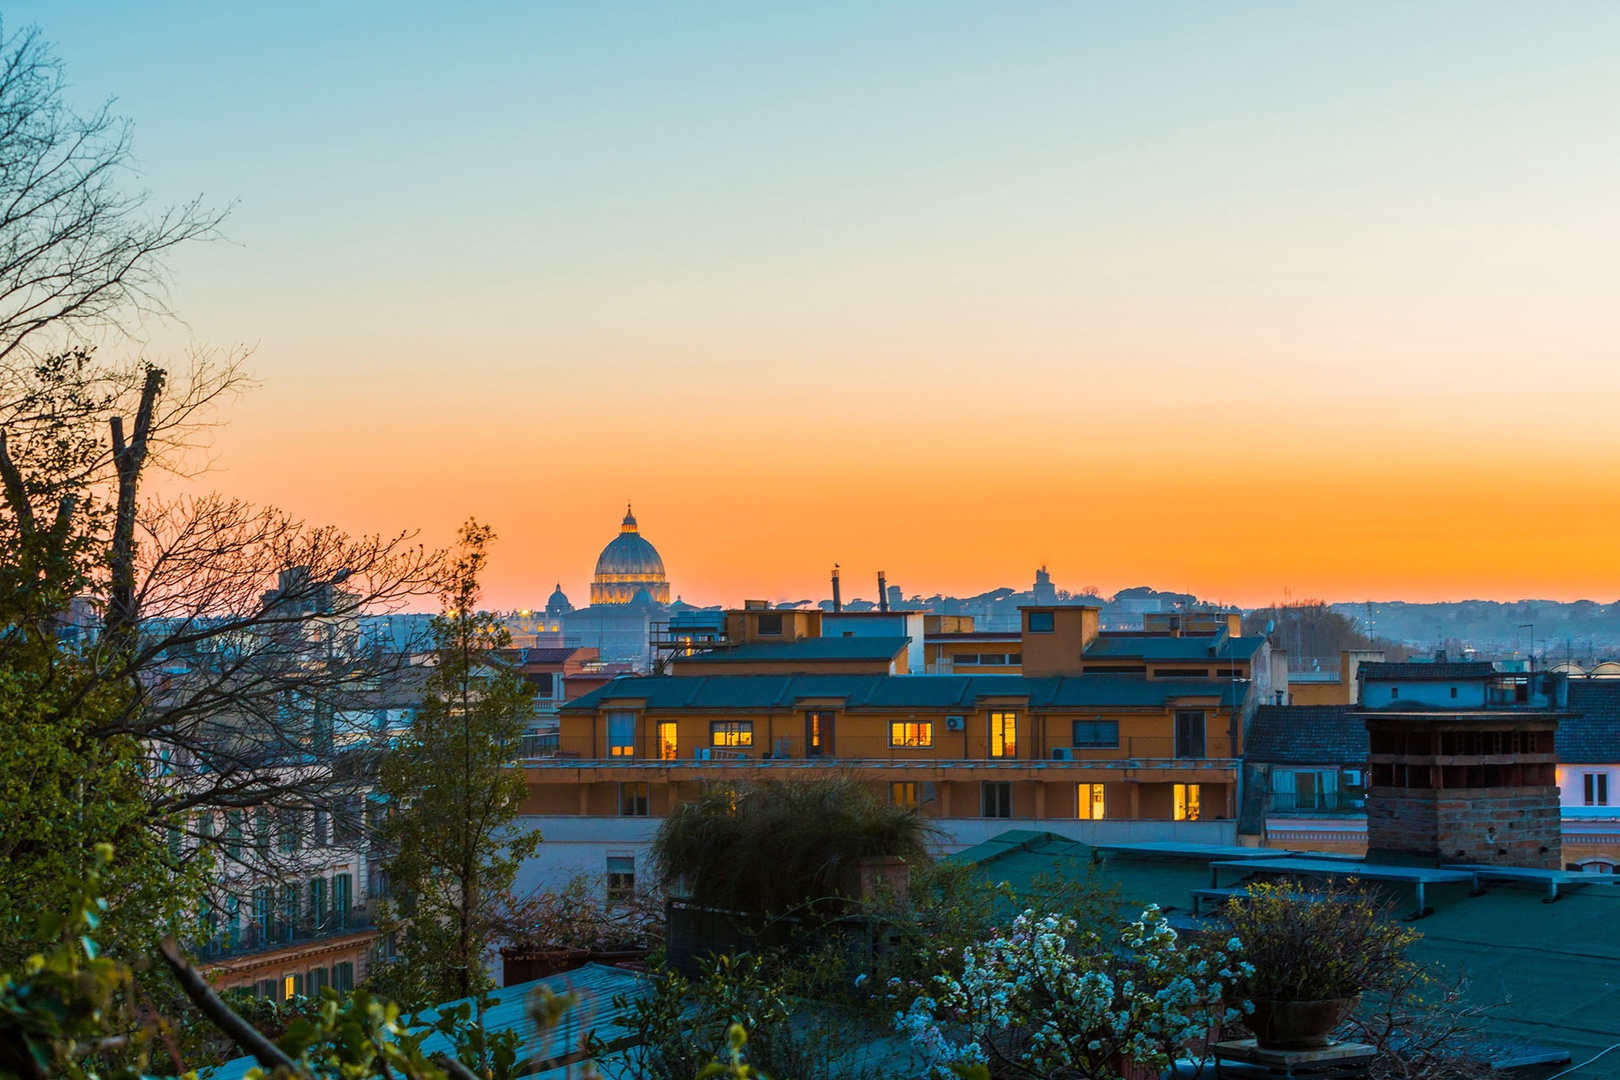 Enchanting views of Rome from the garden and upper floor of the villa.